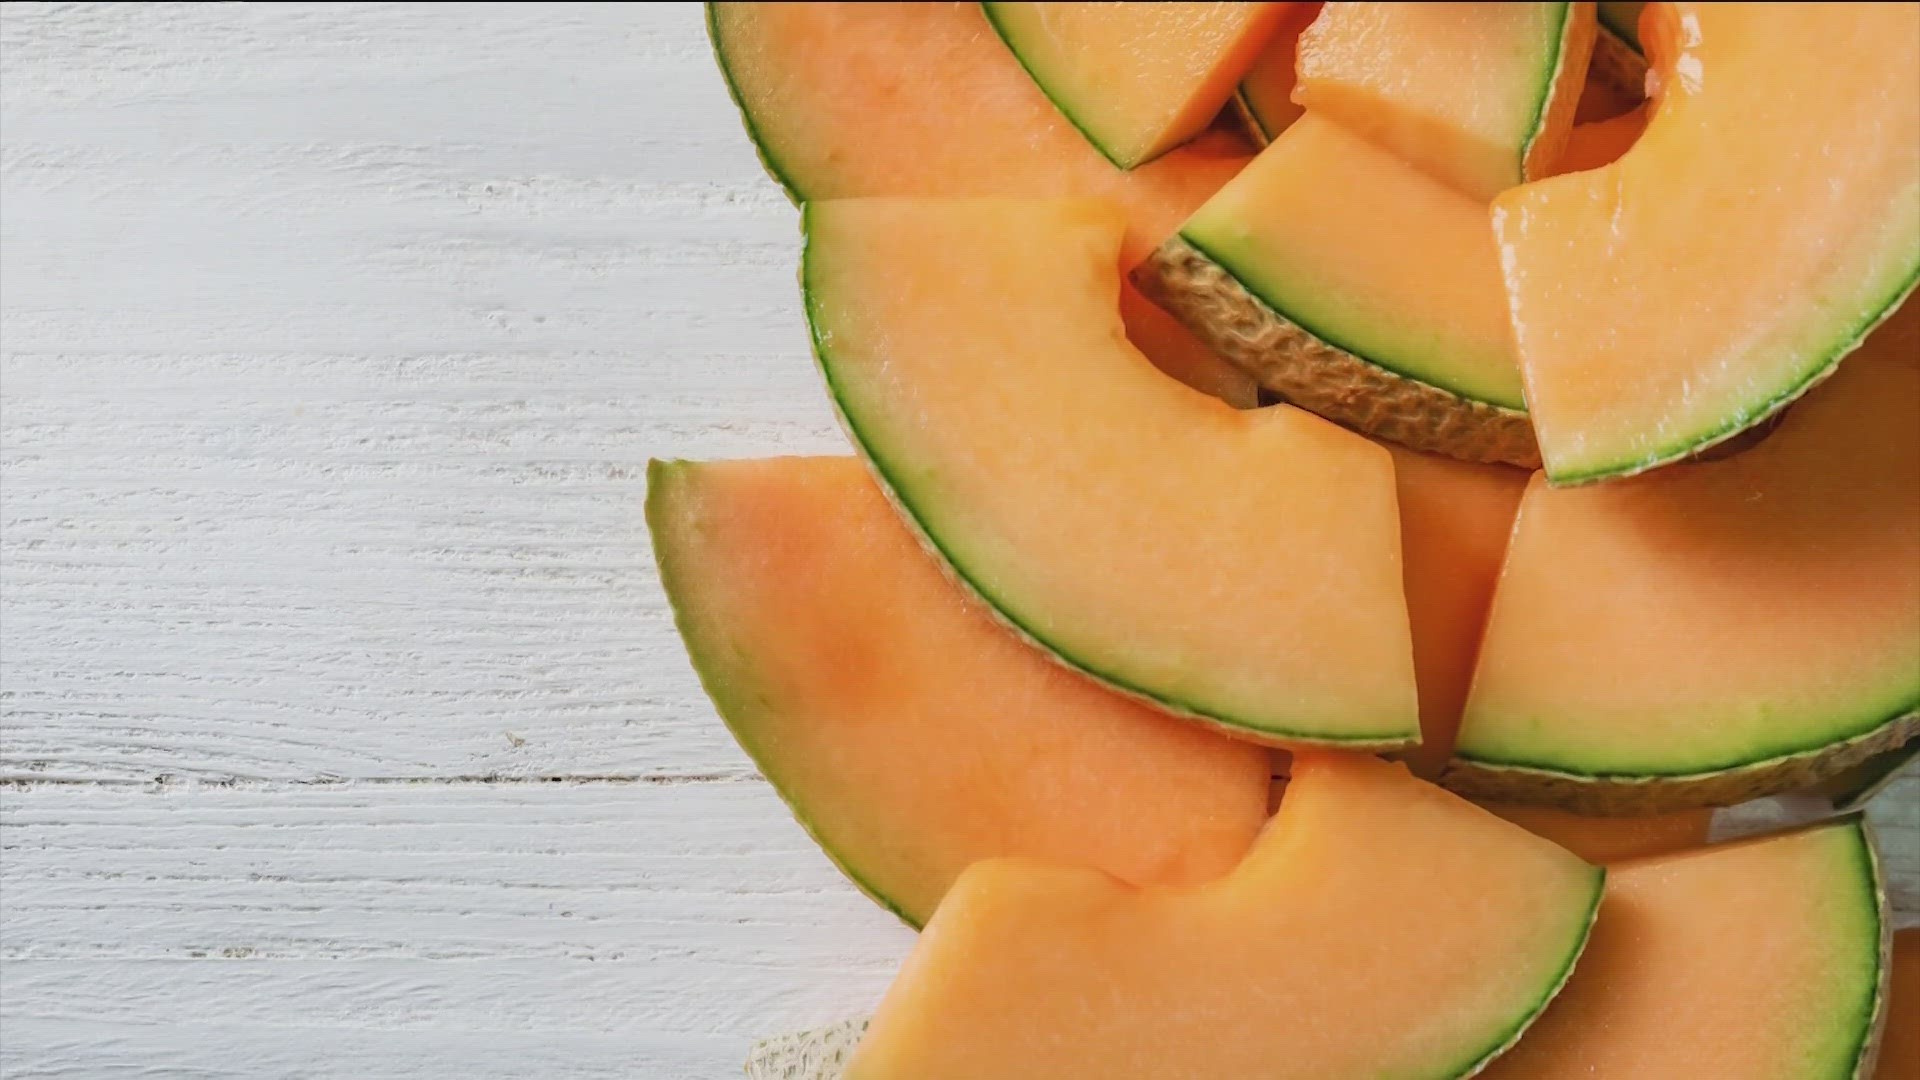 The recall includes cantaloupes and fruit dishes sold at Walmart and RaceTrac.